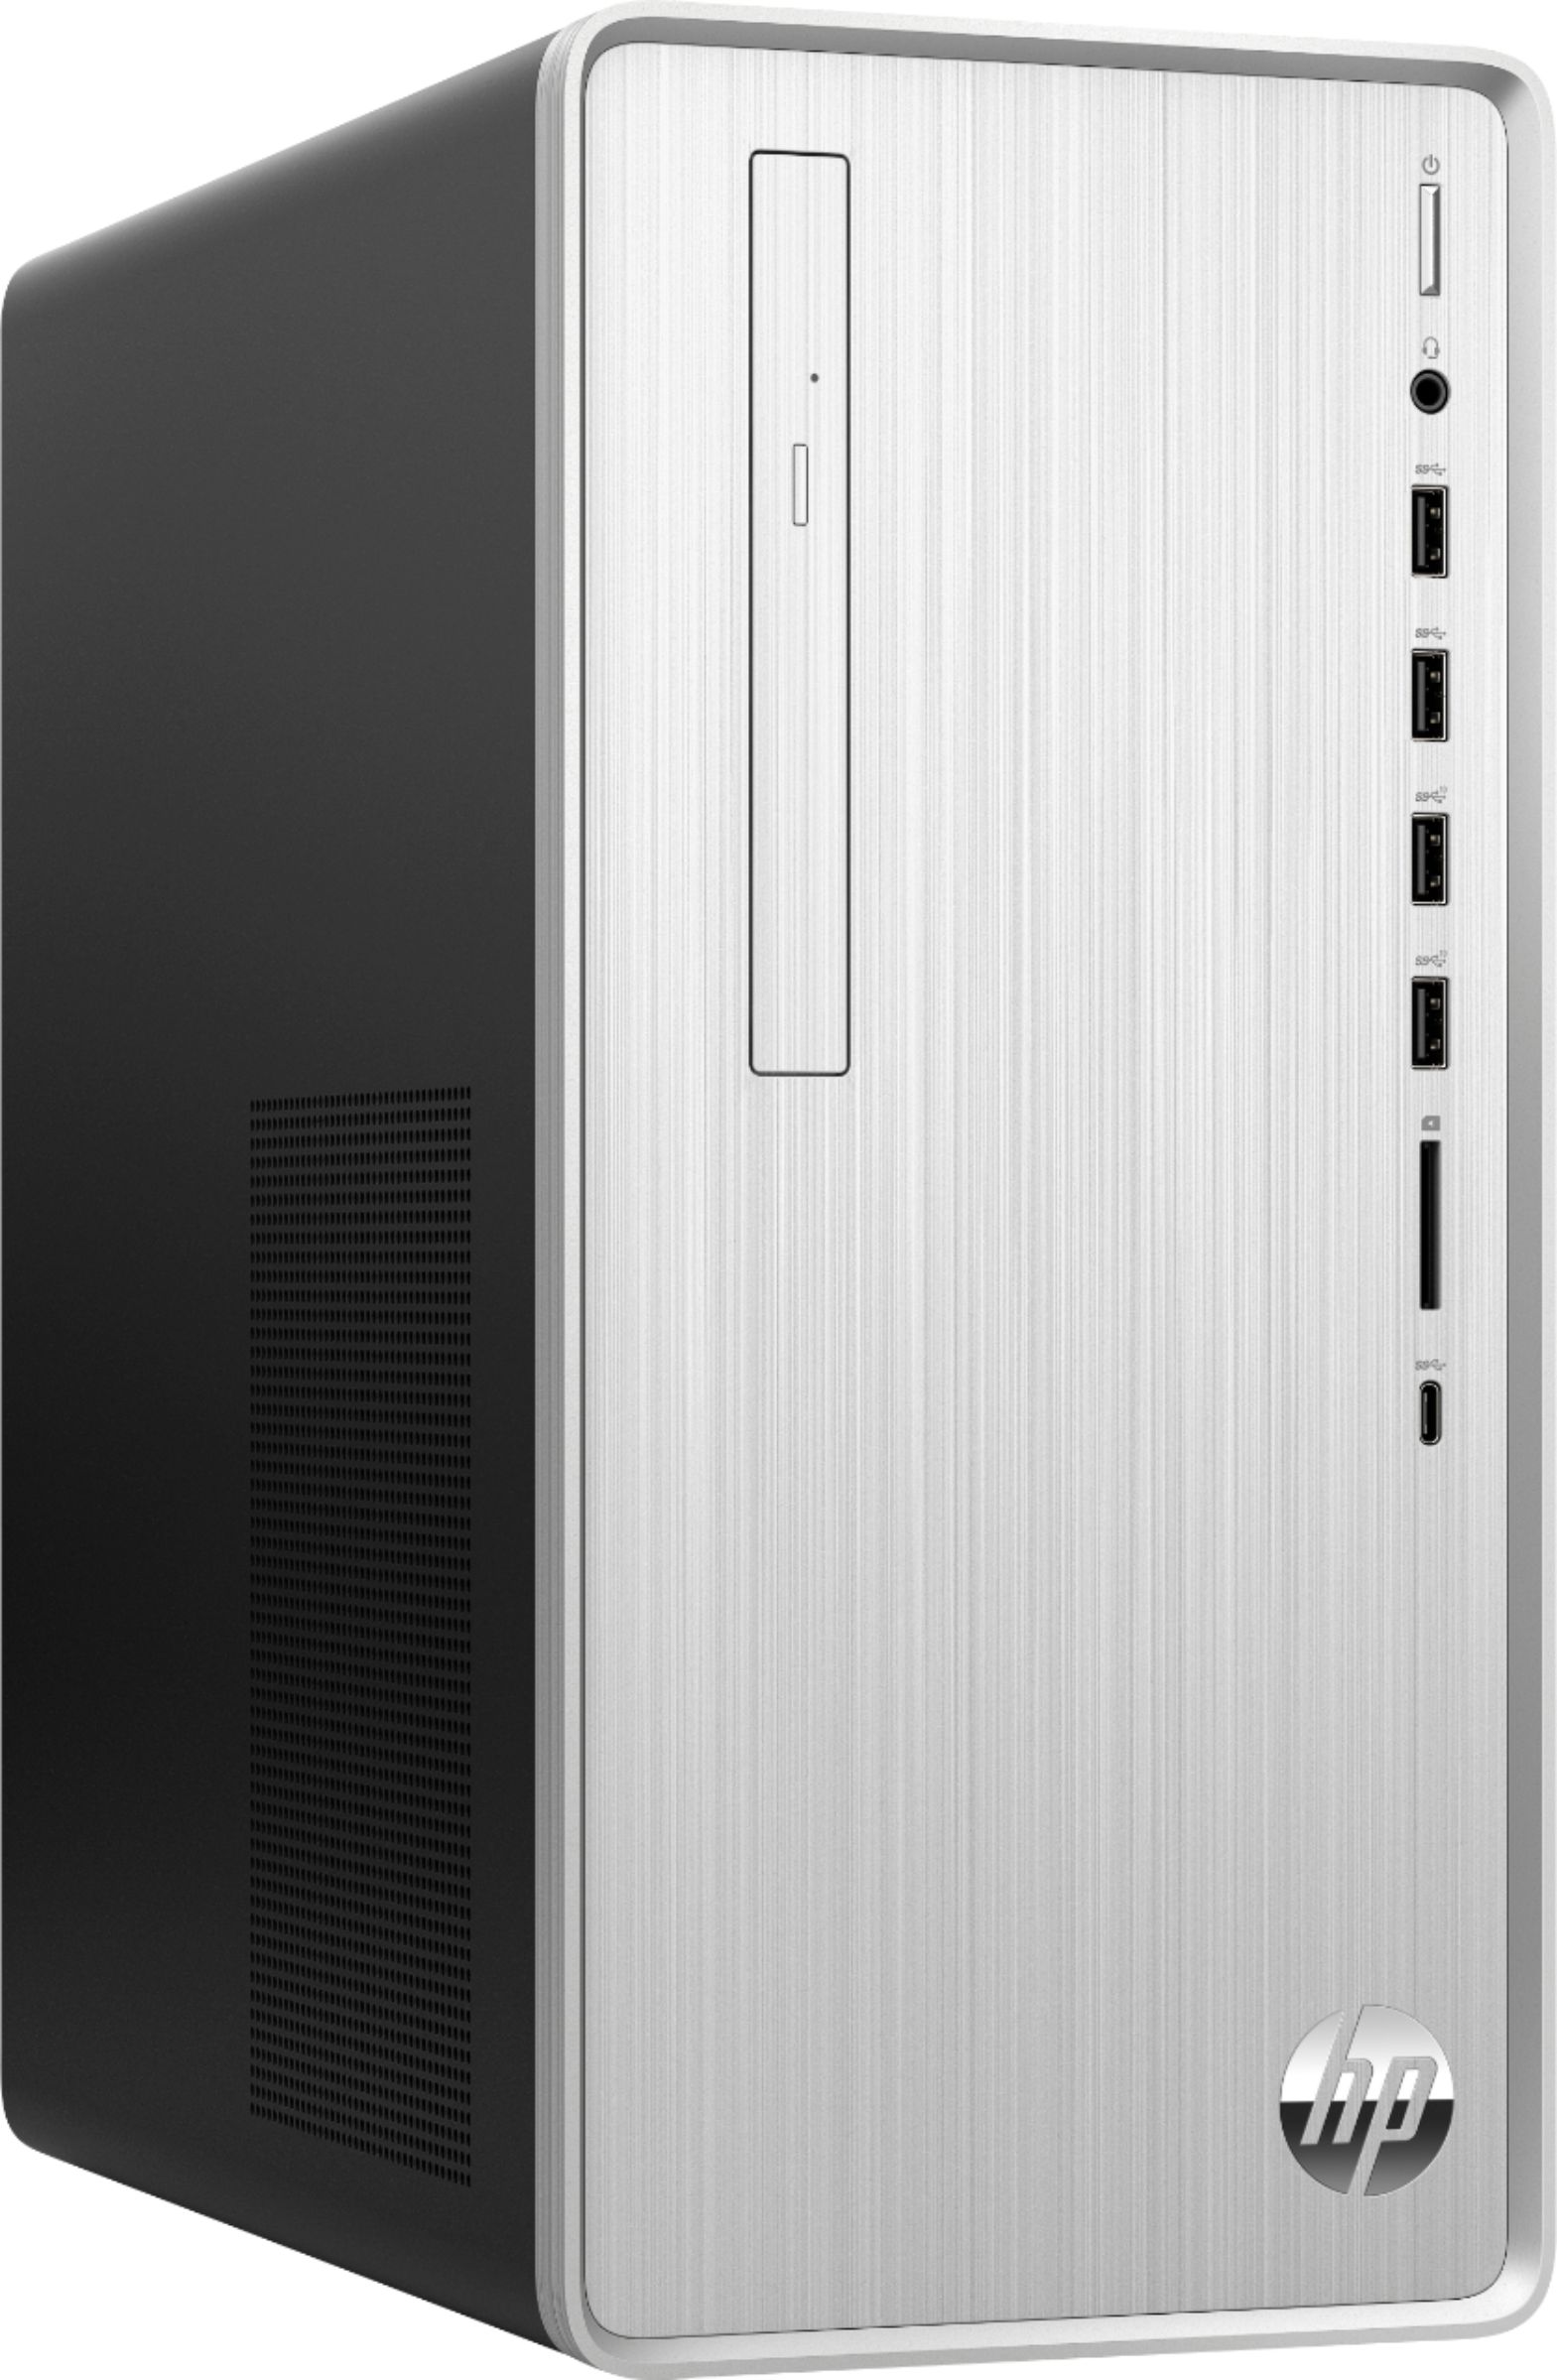 Angle View: HP - Pavilion Desktop - Intel Core i3 - 8GB Memory - 256GB Solid State Drive - Natural Silver